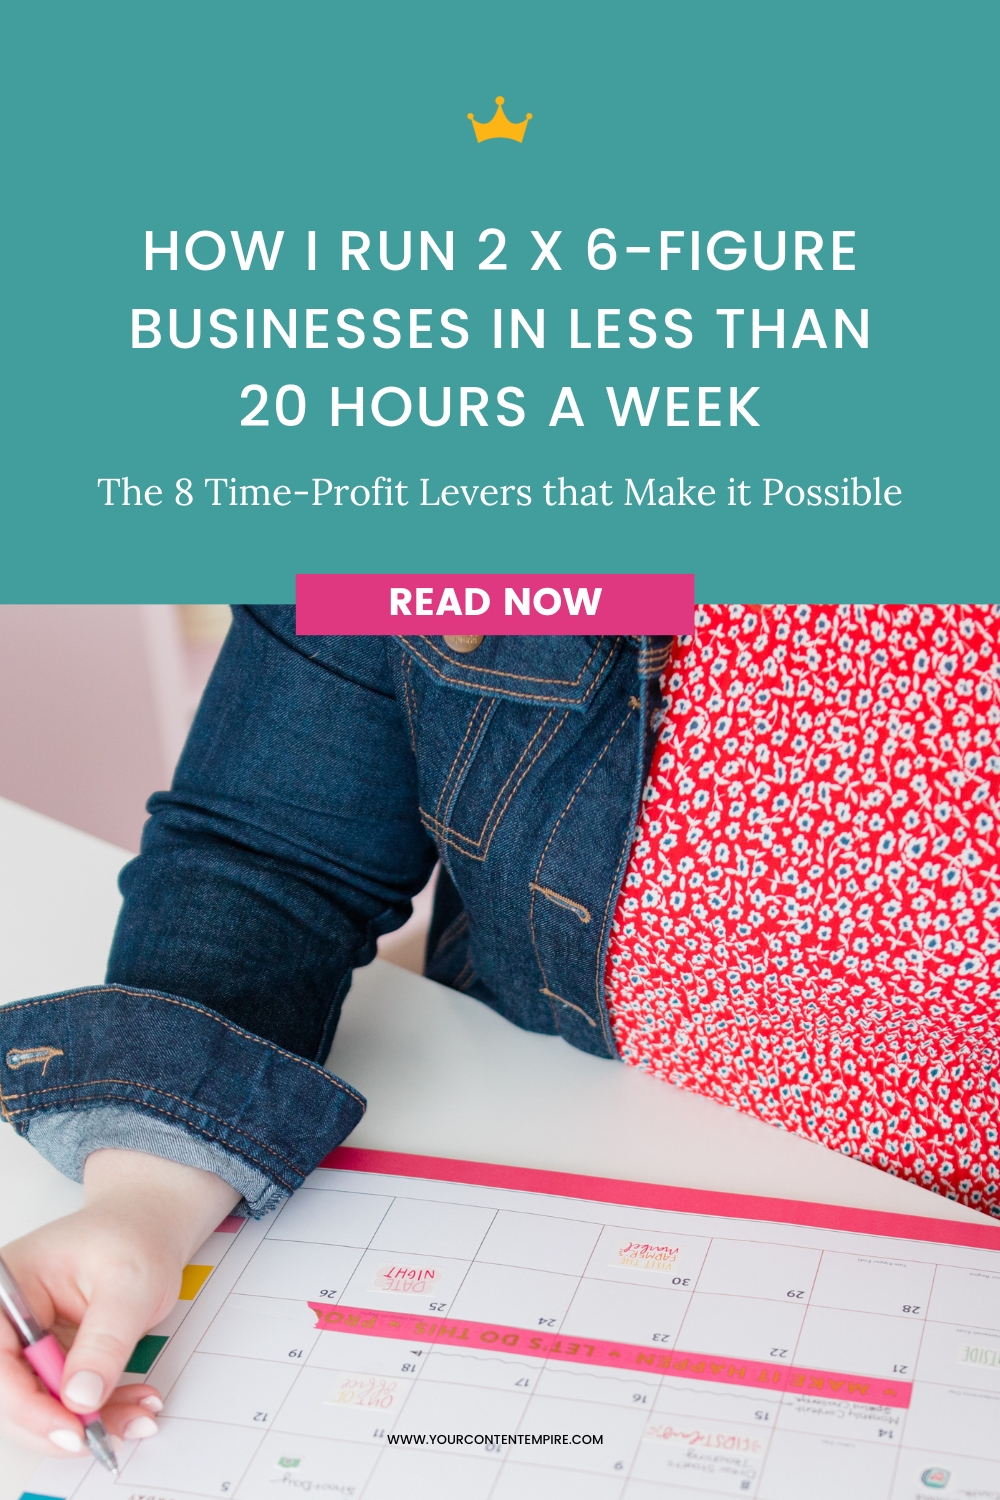 How I Run 2 x 6-Figure Businesses in Less than 20 Hours a Week